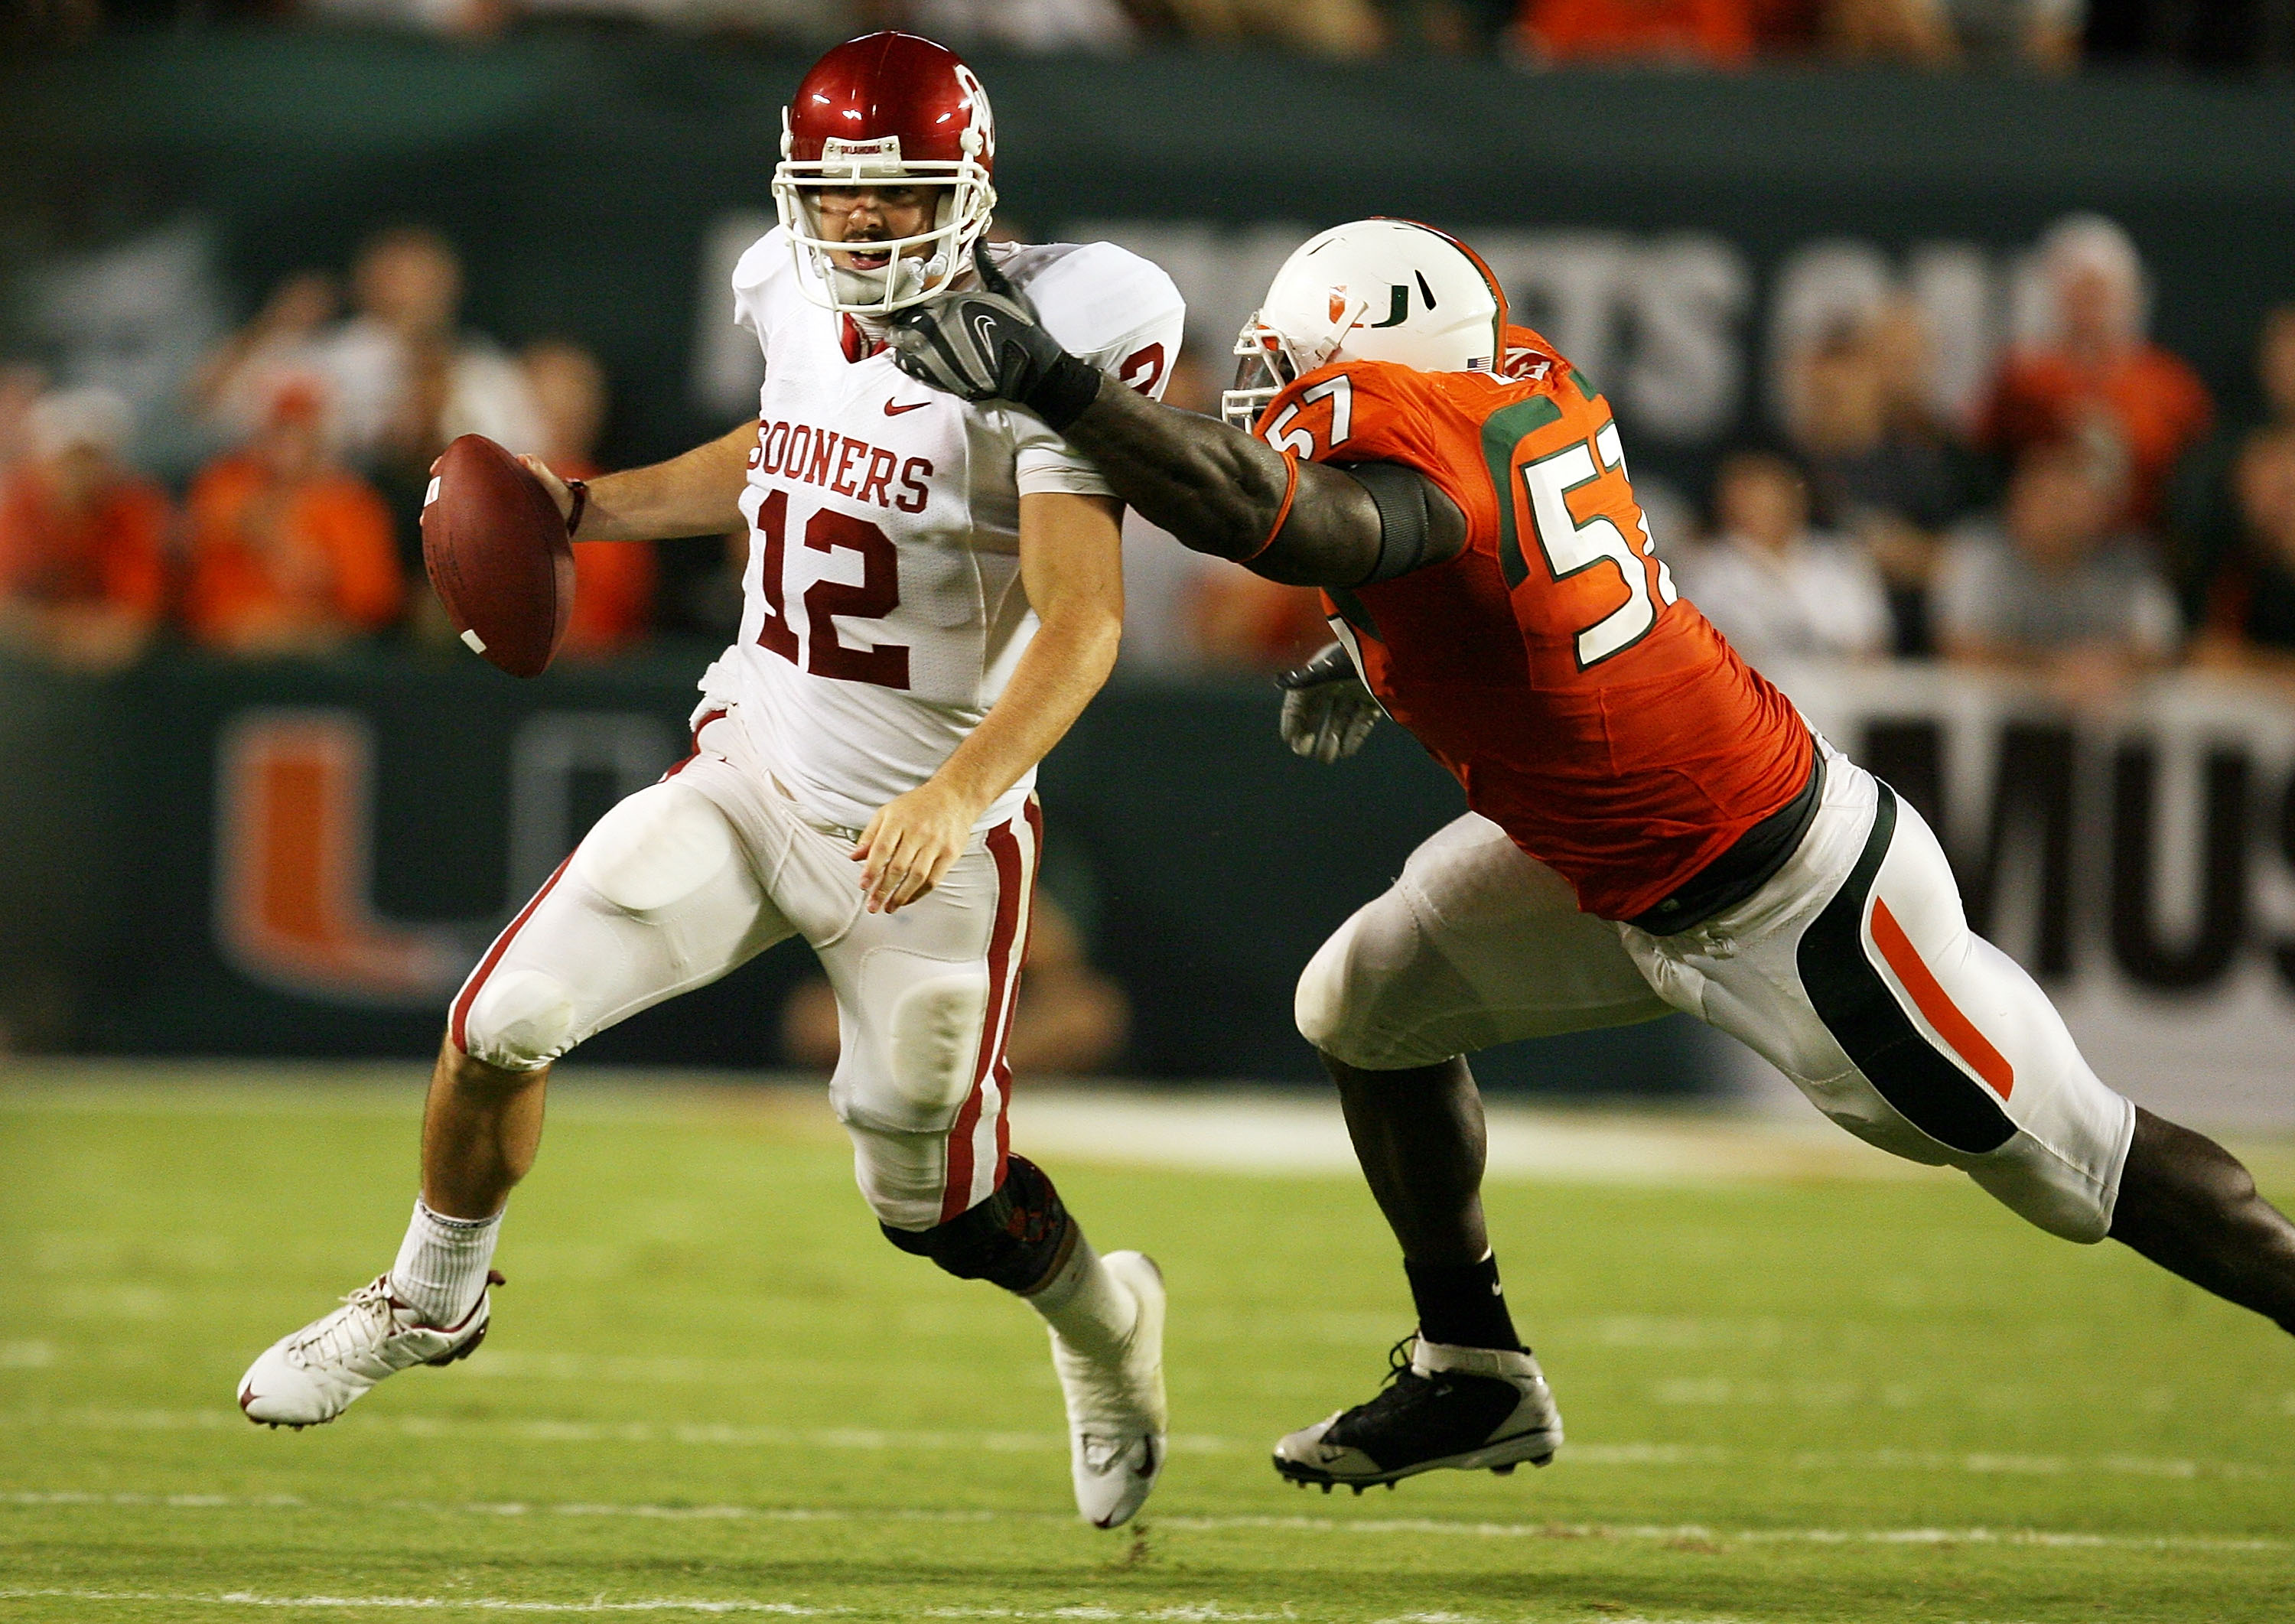 FORT LAUDERDALE, FL - OCTOBER 03: Quarterback Landry Jones #12 of the Oklahoma Sooners is sacked by defensive lineman Allen Bailey #57 of the Miami Hurricanes knocked down a pass attempt at Land Shark Stadium on October 3, 2009 in Fort Lauderdale, Florida